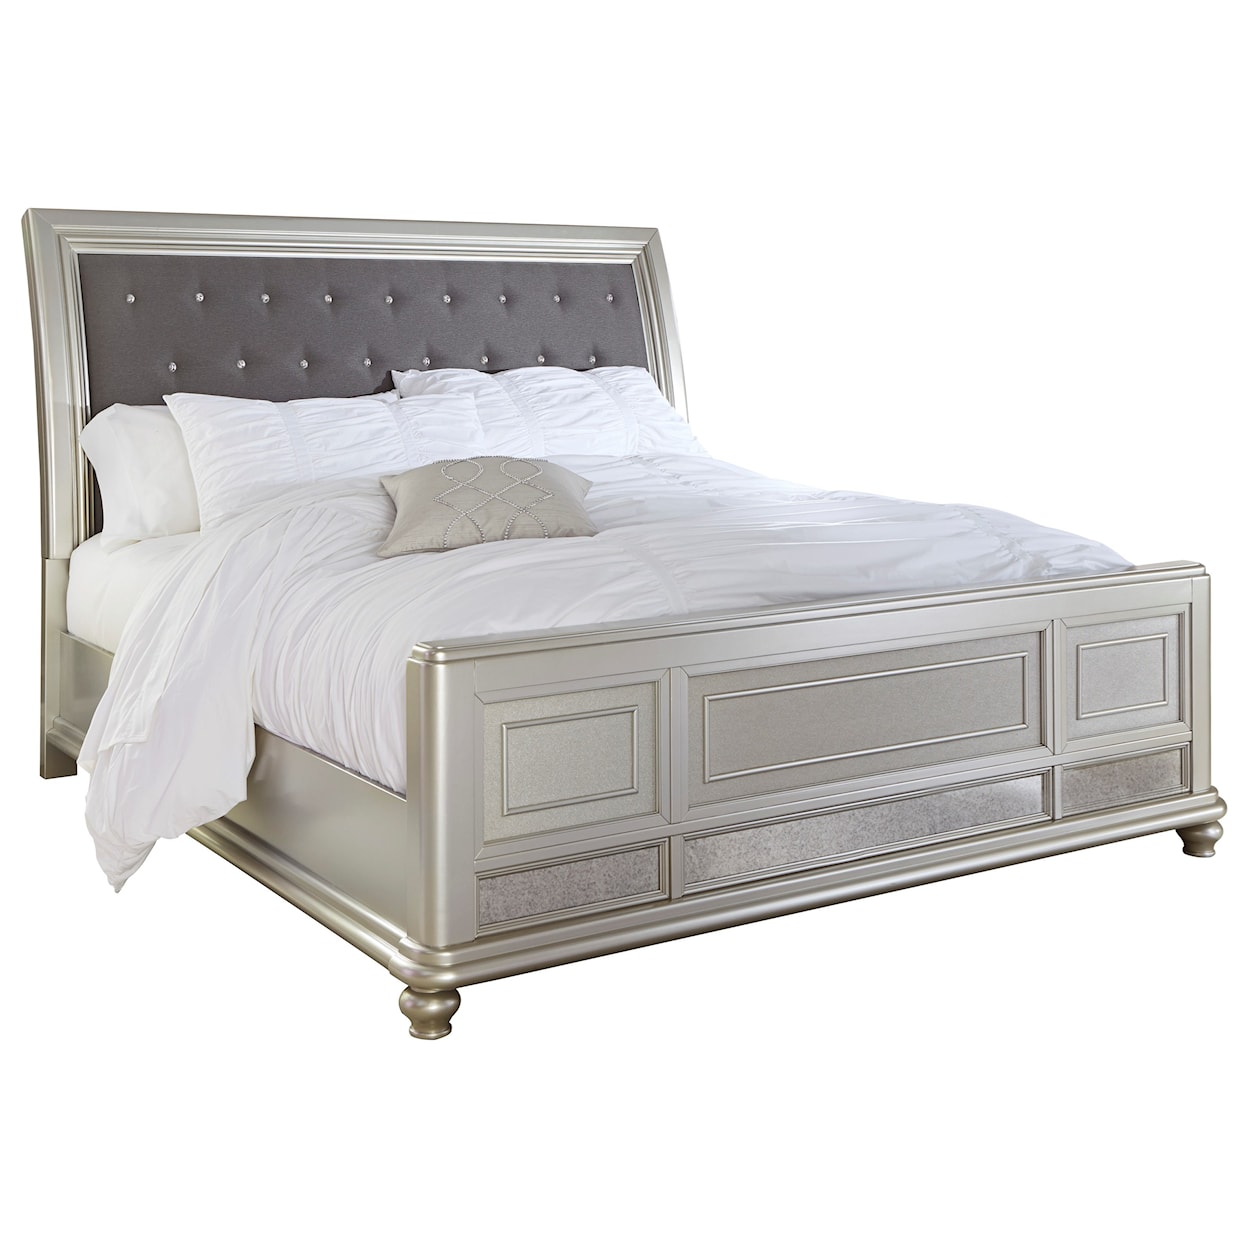 Signature Design by Ashley Coralayne King Bed with Upholstered Sleigh Headboard